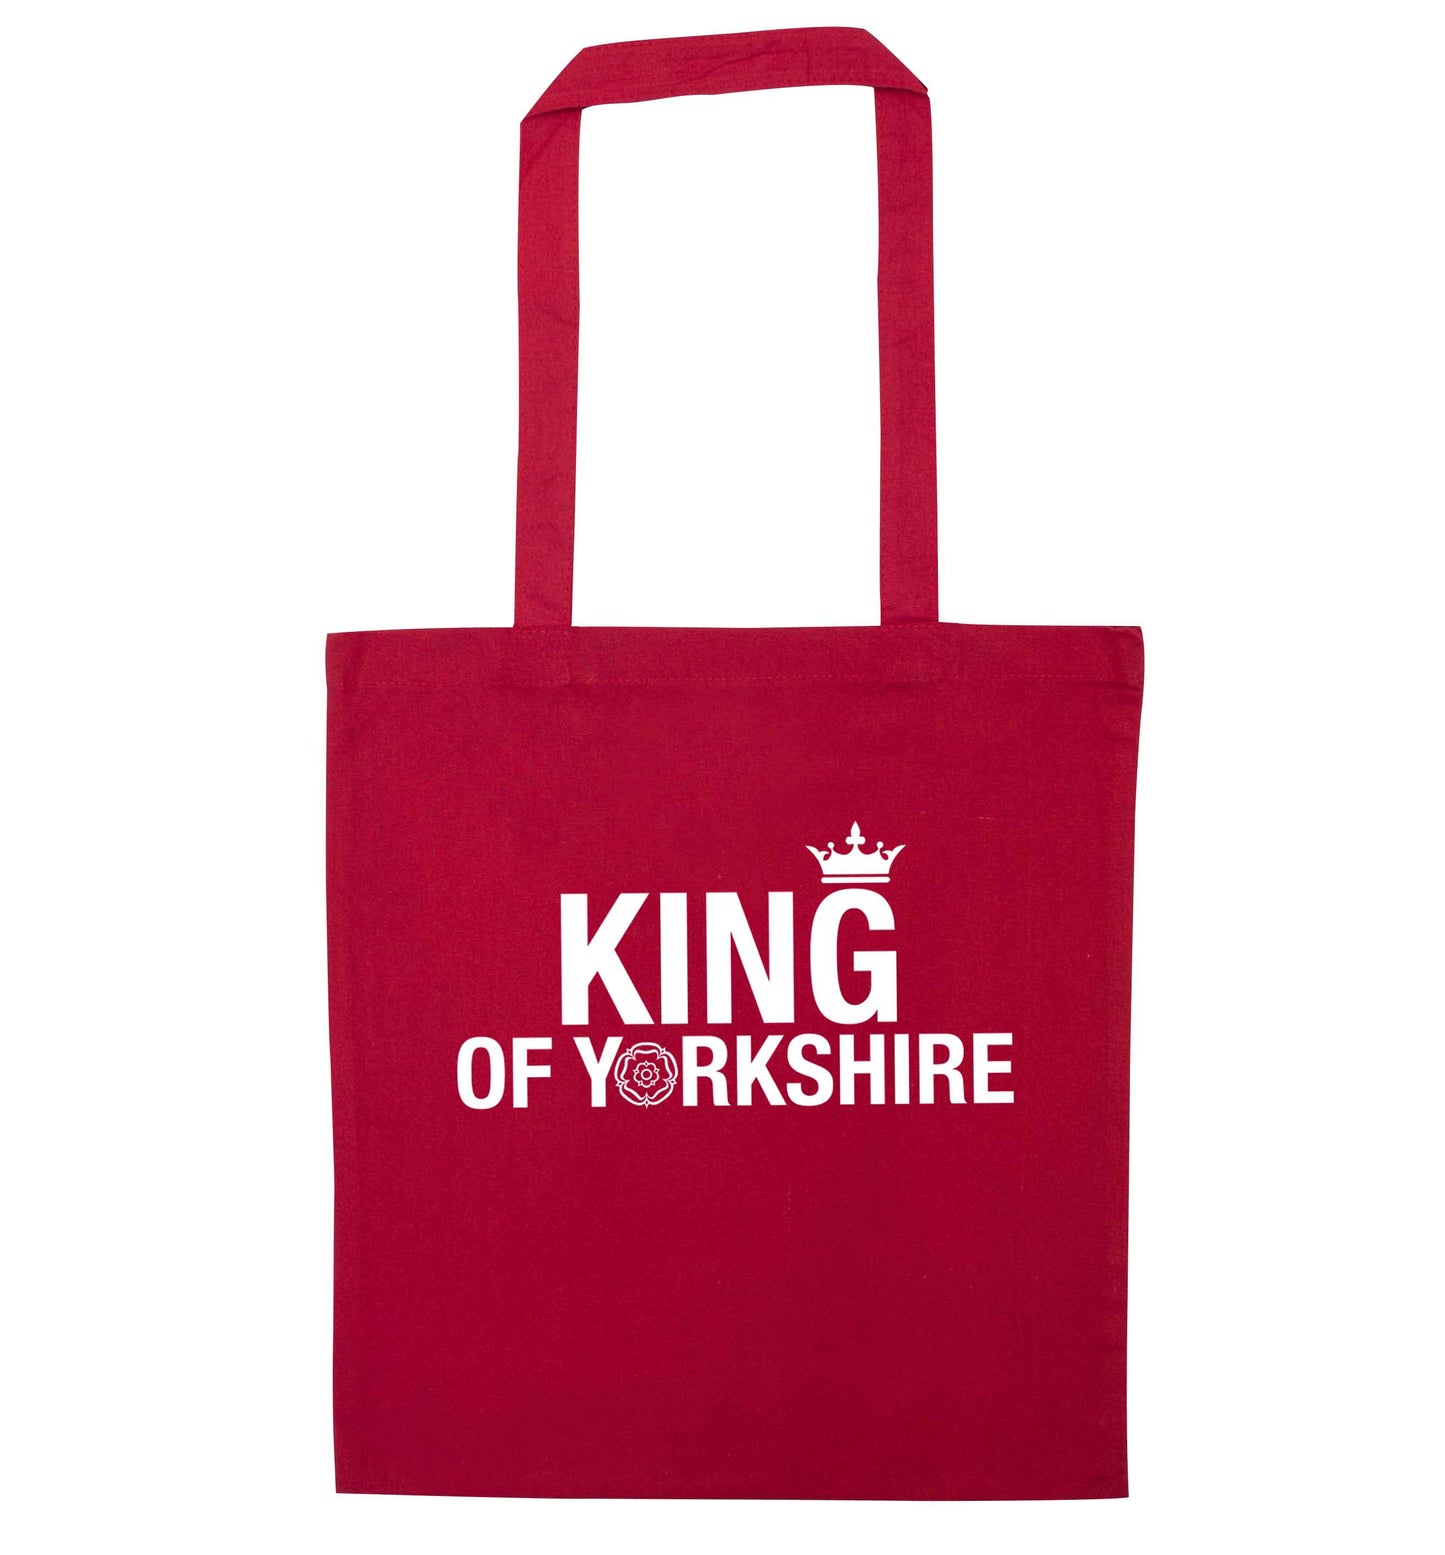 King of Yorkshire red tote bag